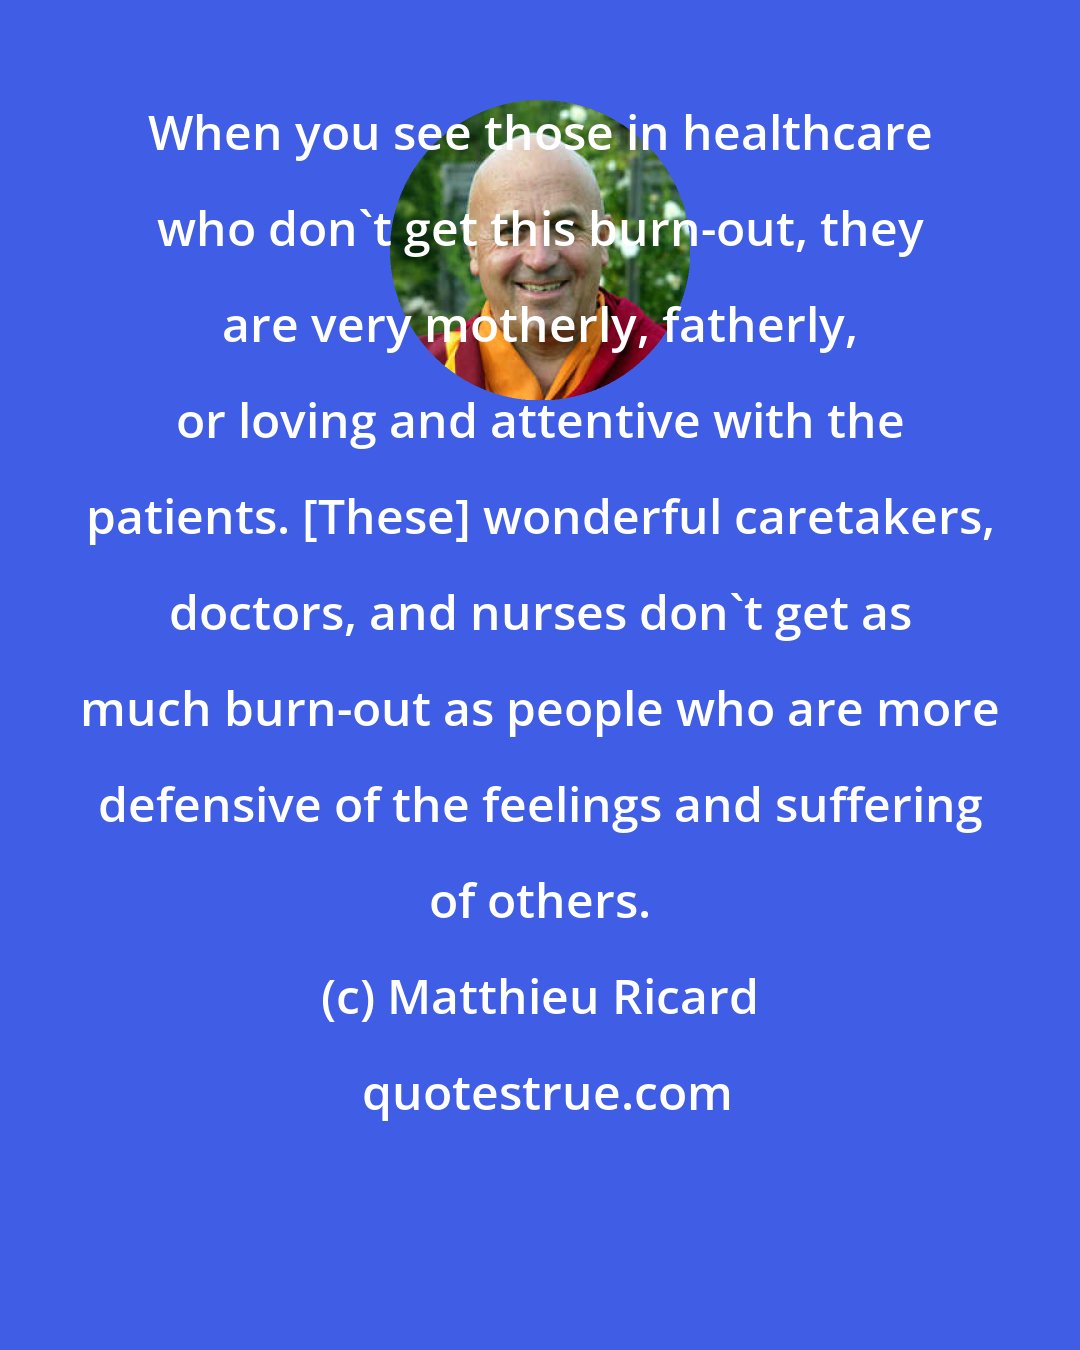 Matthieu Ricard: When you see those in healthcare who don't get this burn-out, they are very motherly, fatherly, or loving and attentive with the patients. [These] wonderful caretakers, doctors, and nurses don't get as much burn-out as people who are more defensive of the feelings and suffering of others.